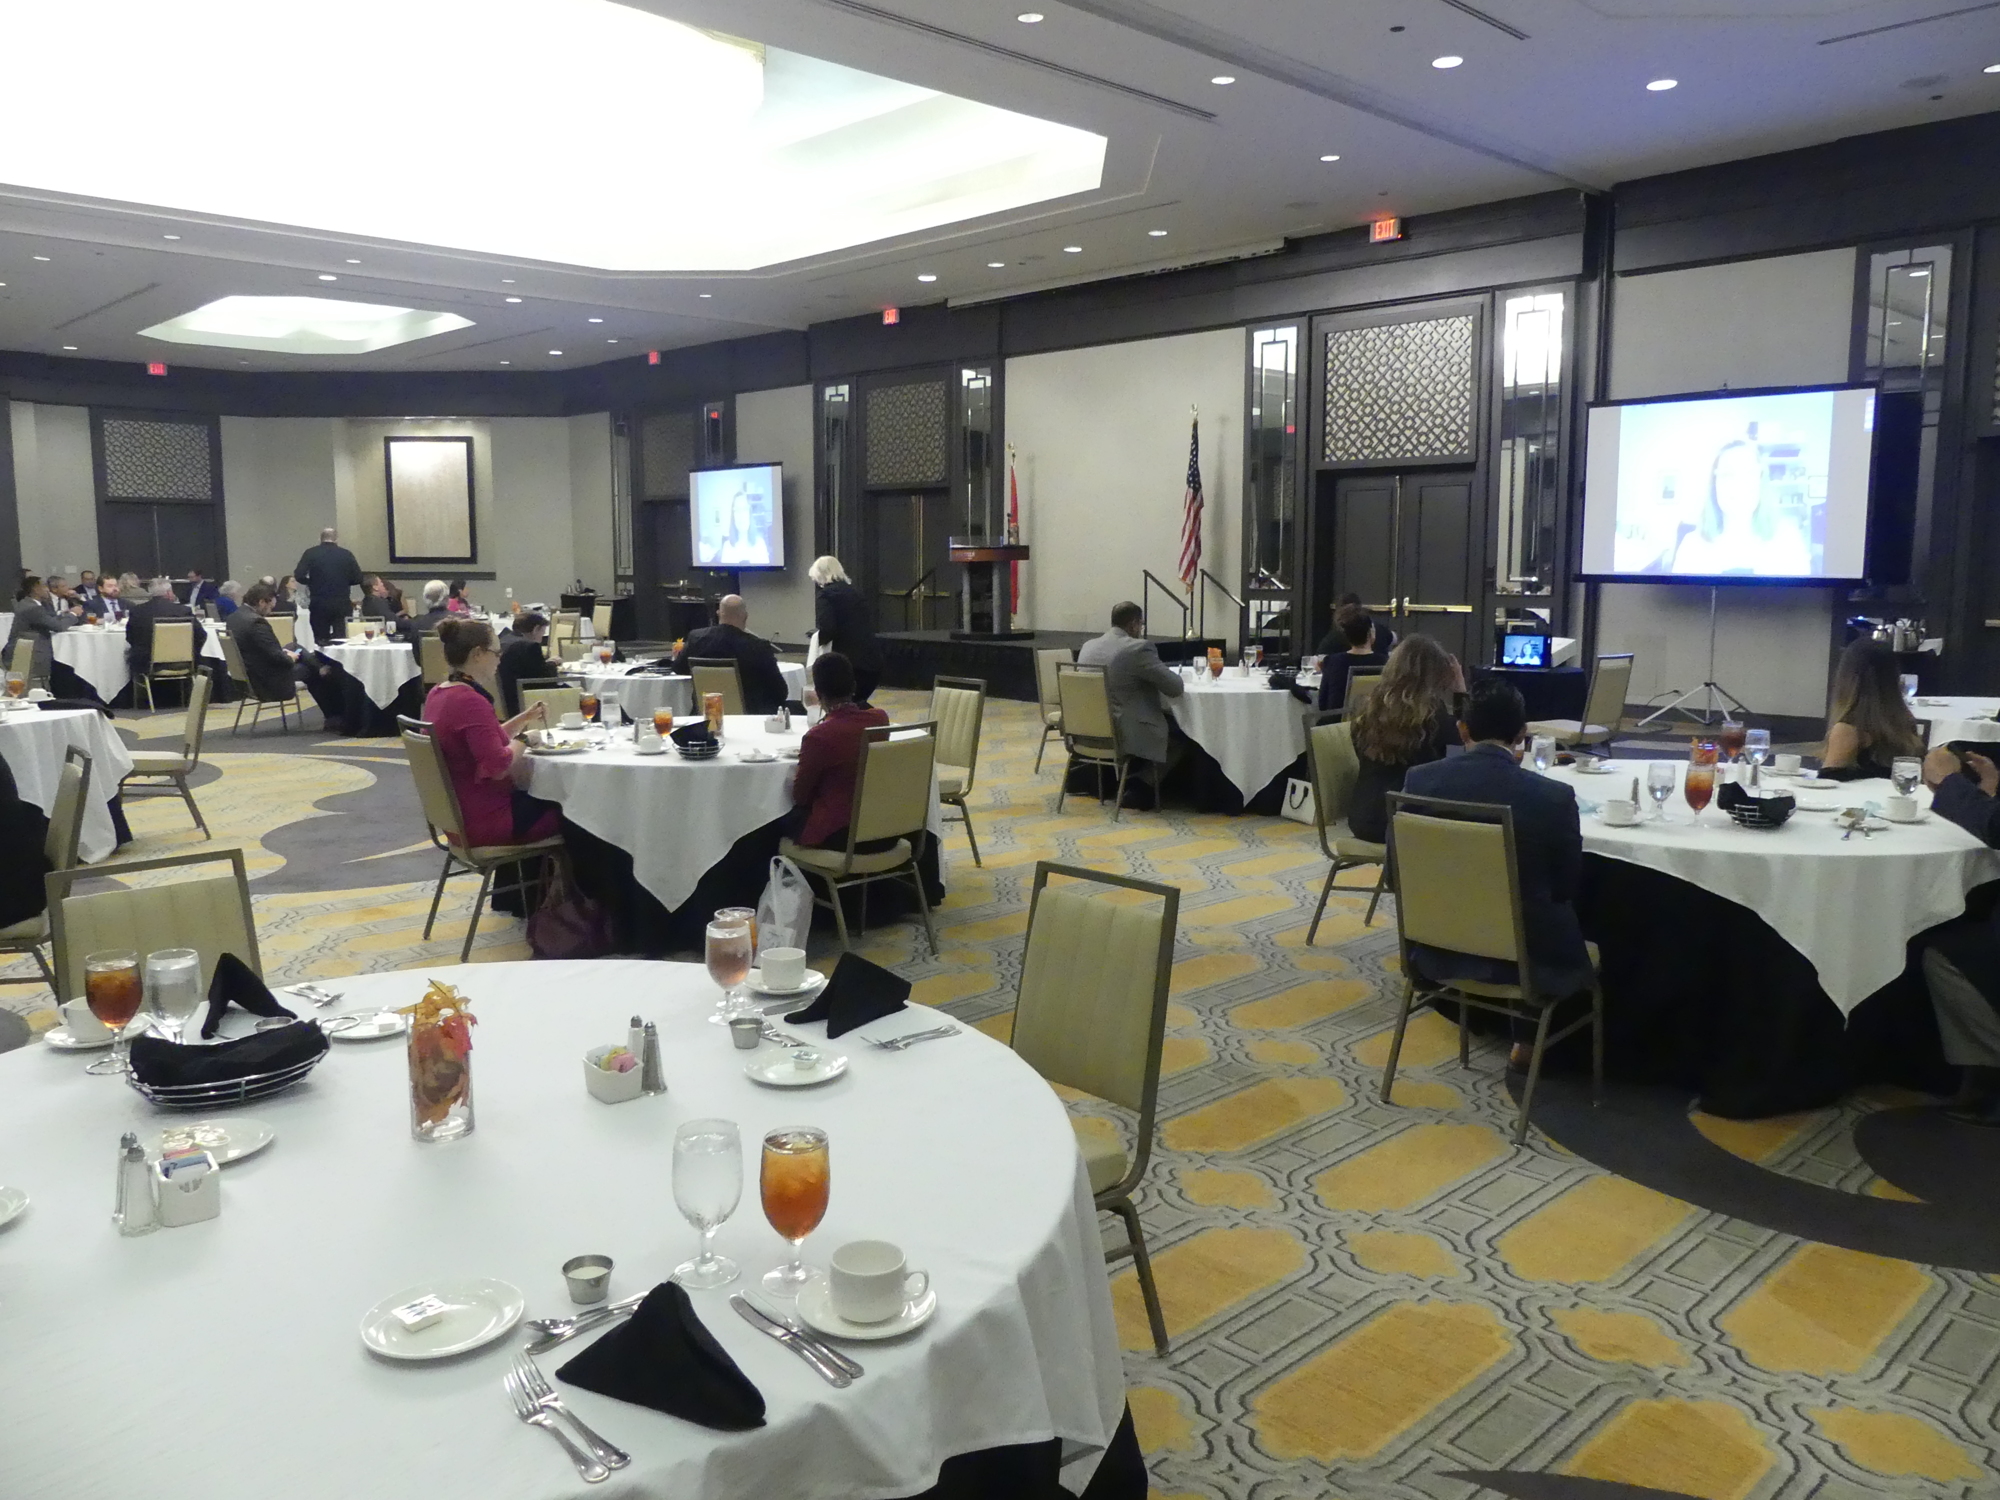 The Jacksonville Bar Association had its membership meeting Oct. 21 at the Omni Jacksonville Hotel. Because of the COVID-19 pandemic, it was the first time since January that members and guests met in person.